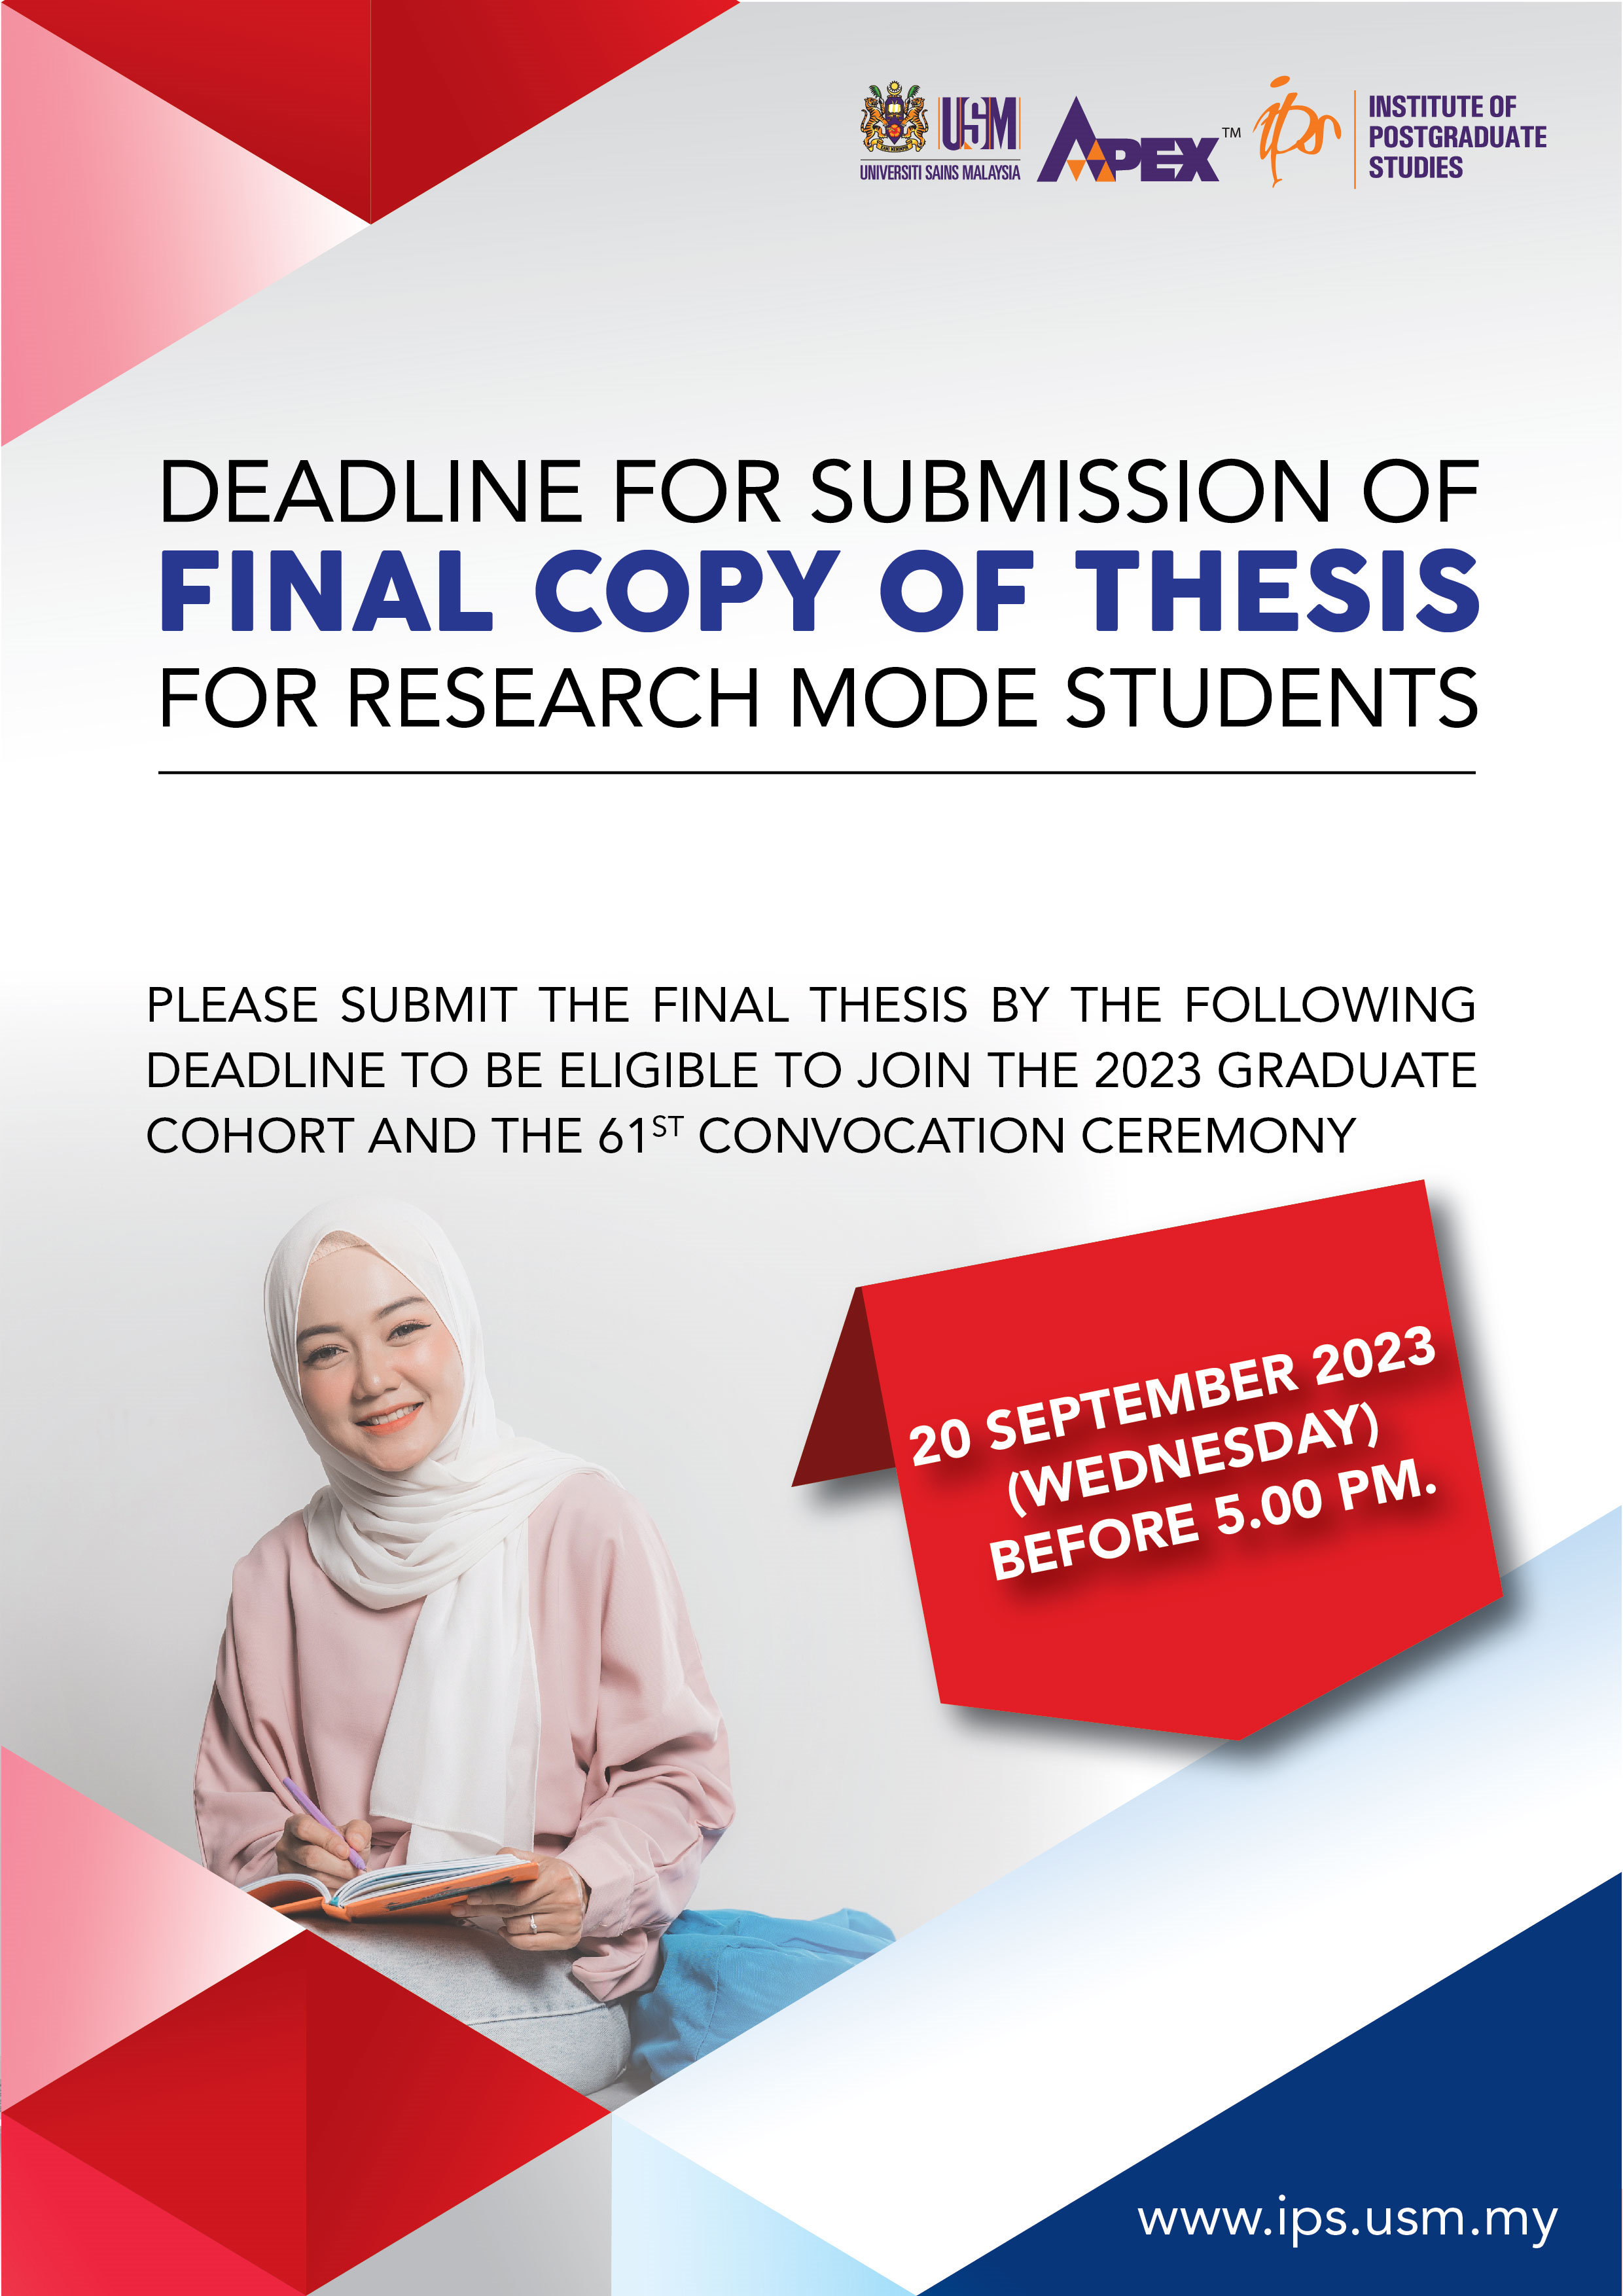 DEADLINE FOR SUBMISSION OF FINAL COPY OF THESIS 